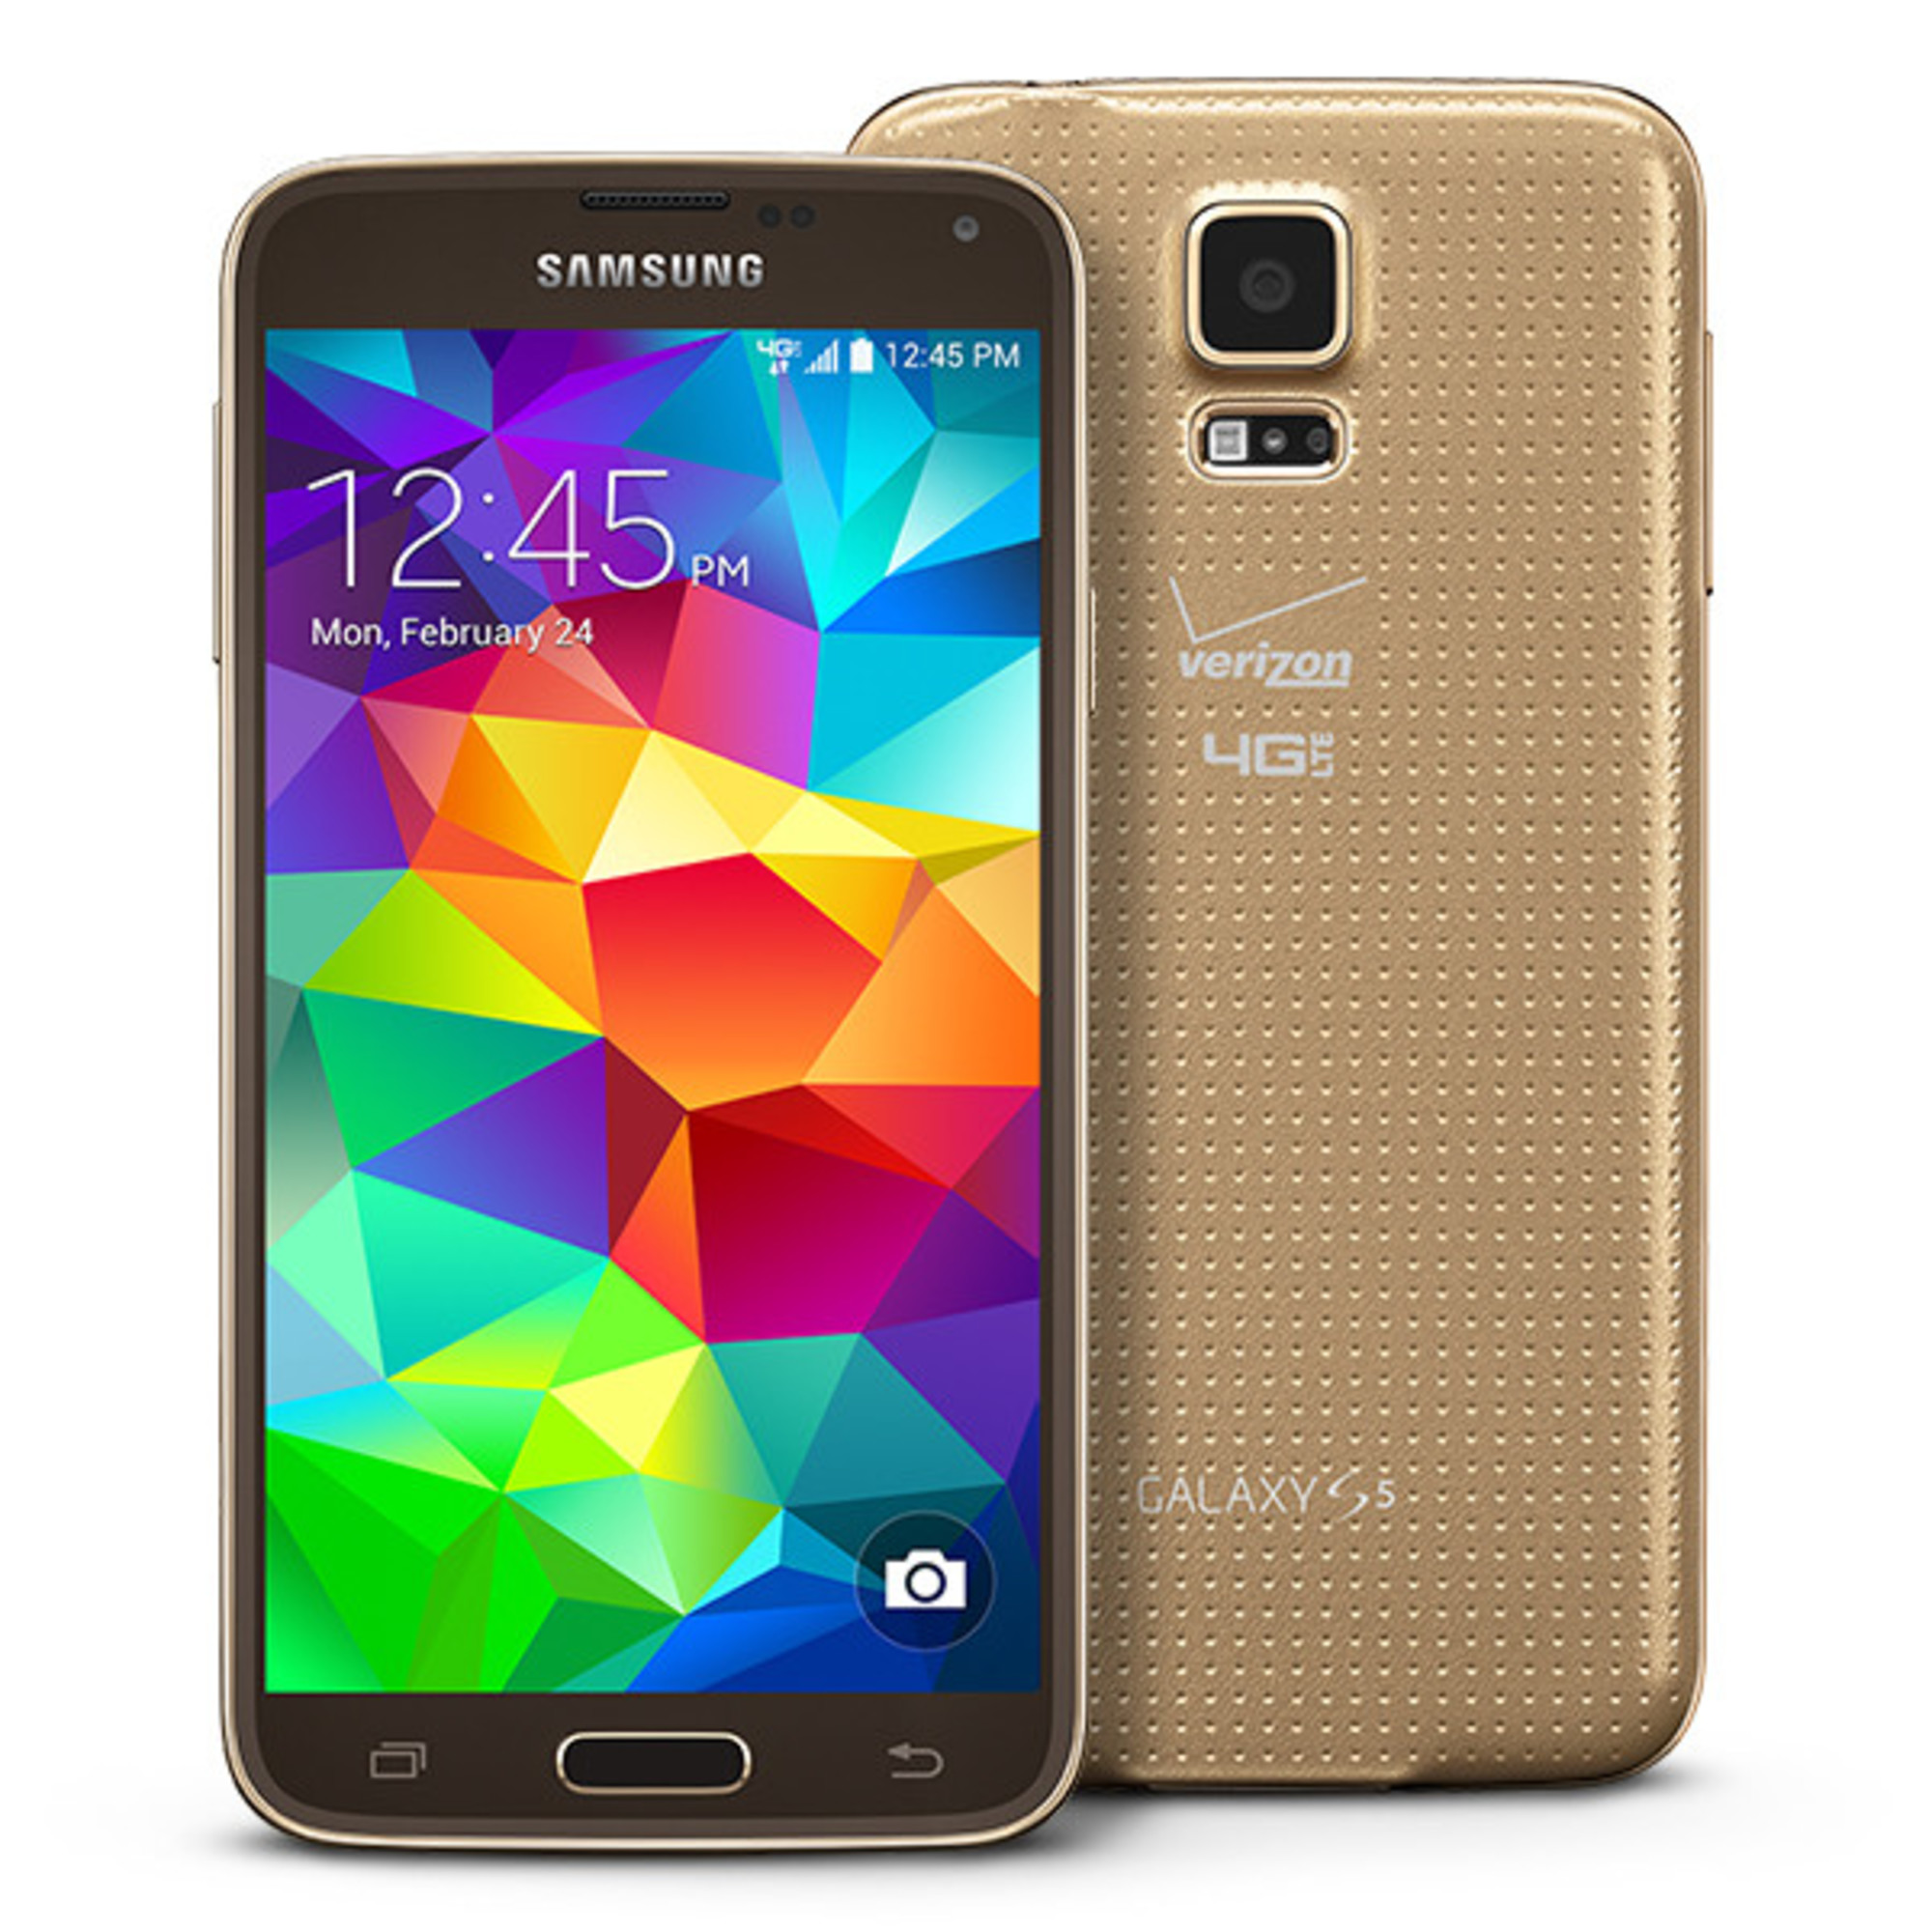 Top 92+ Pictures Photos Of Samsung Galaxy S5 Latest